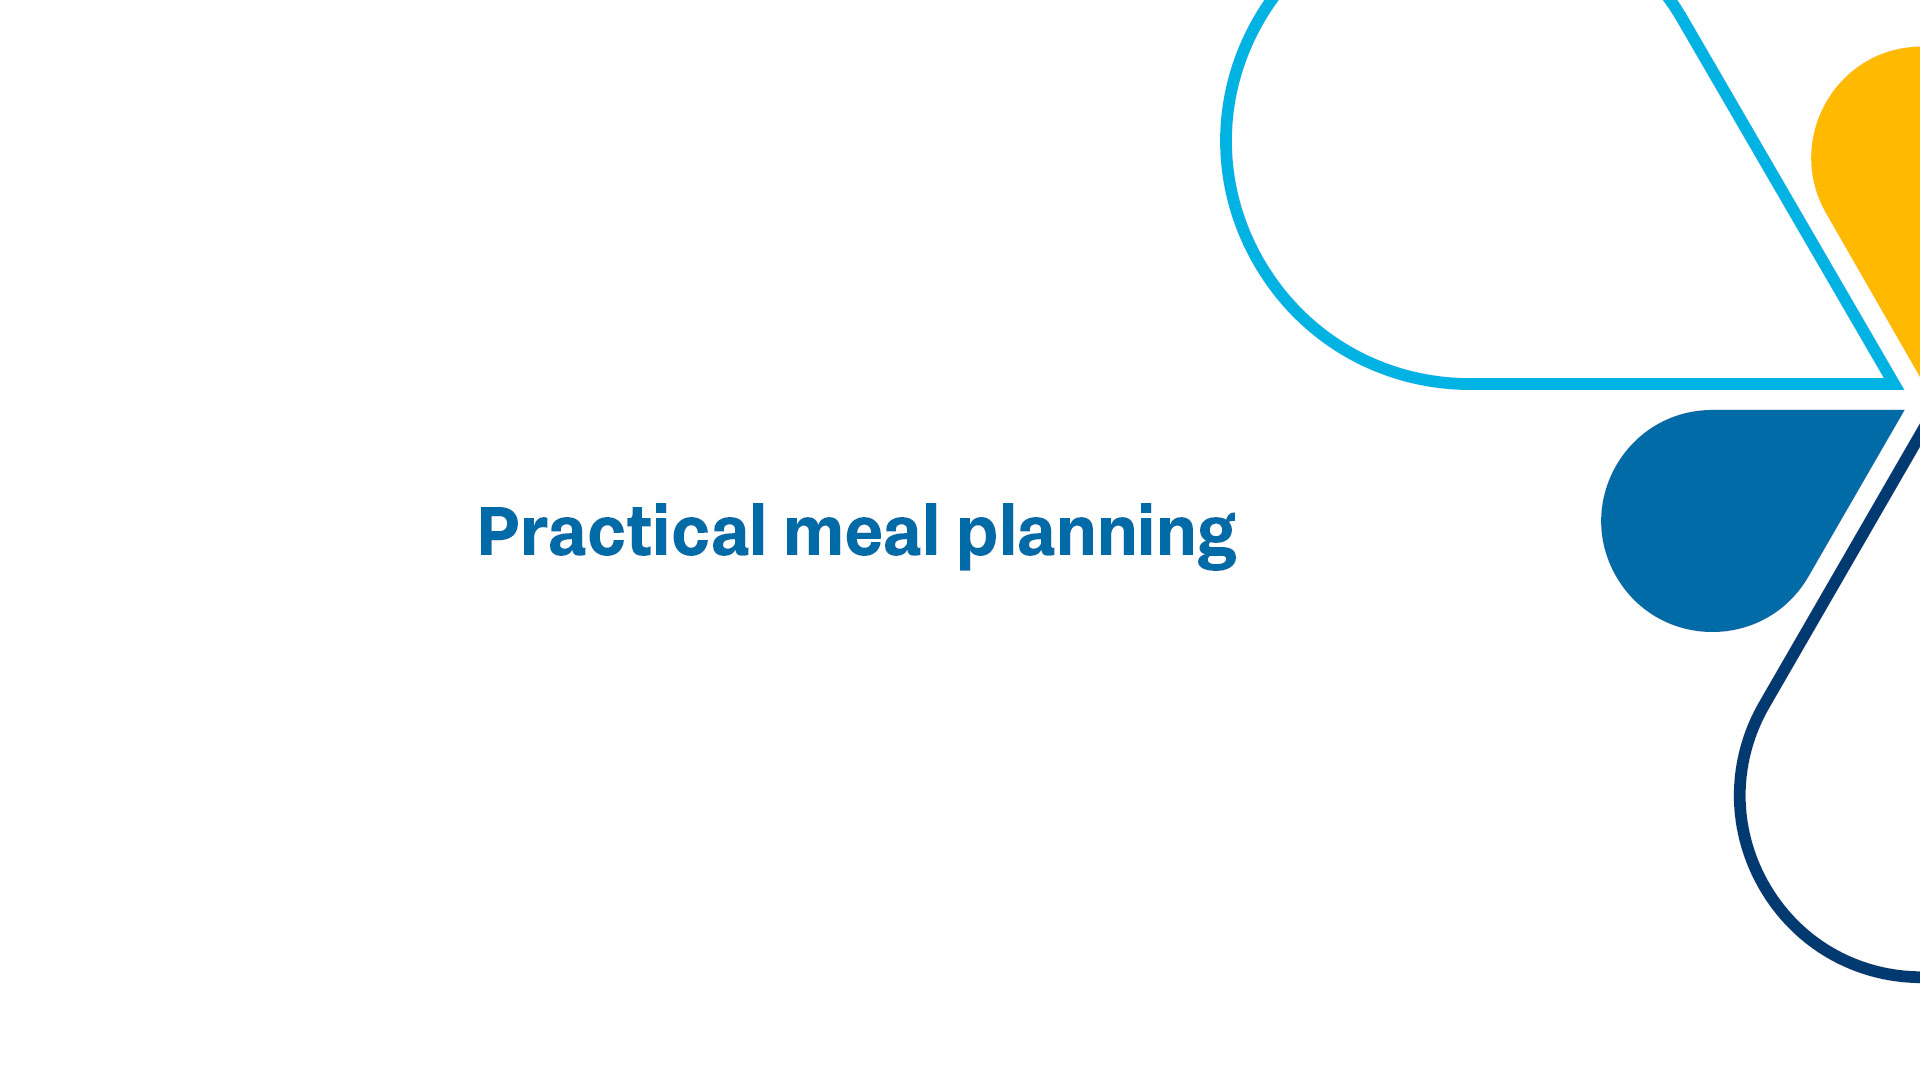 Practical meal planning